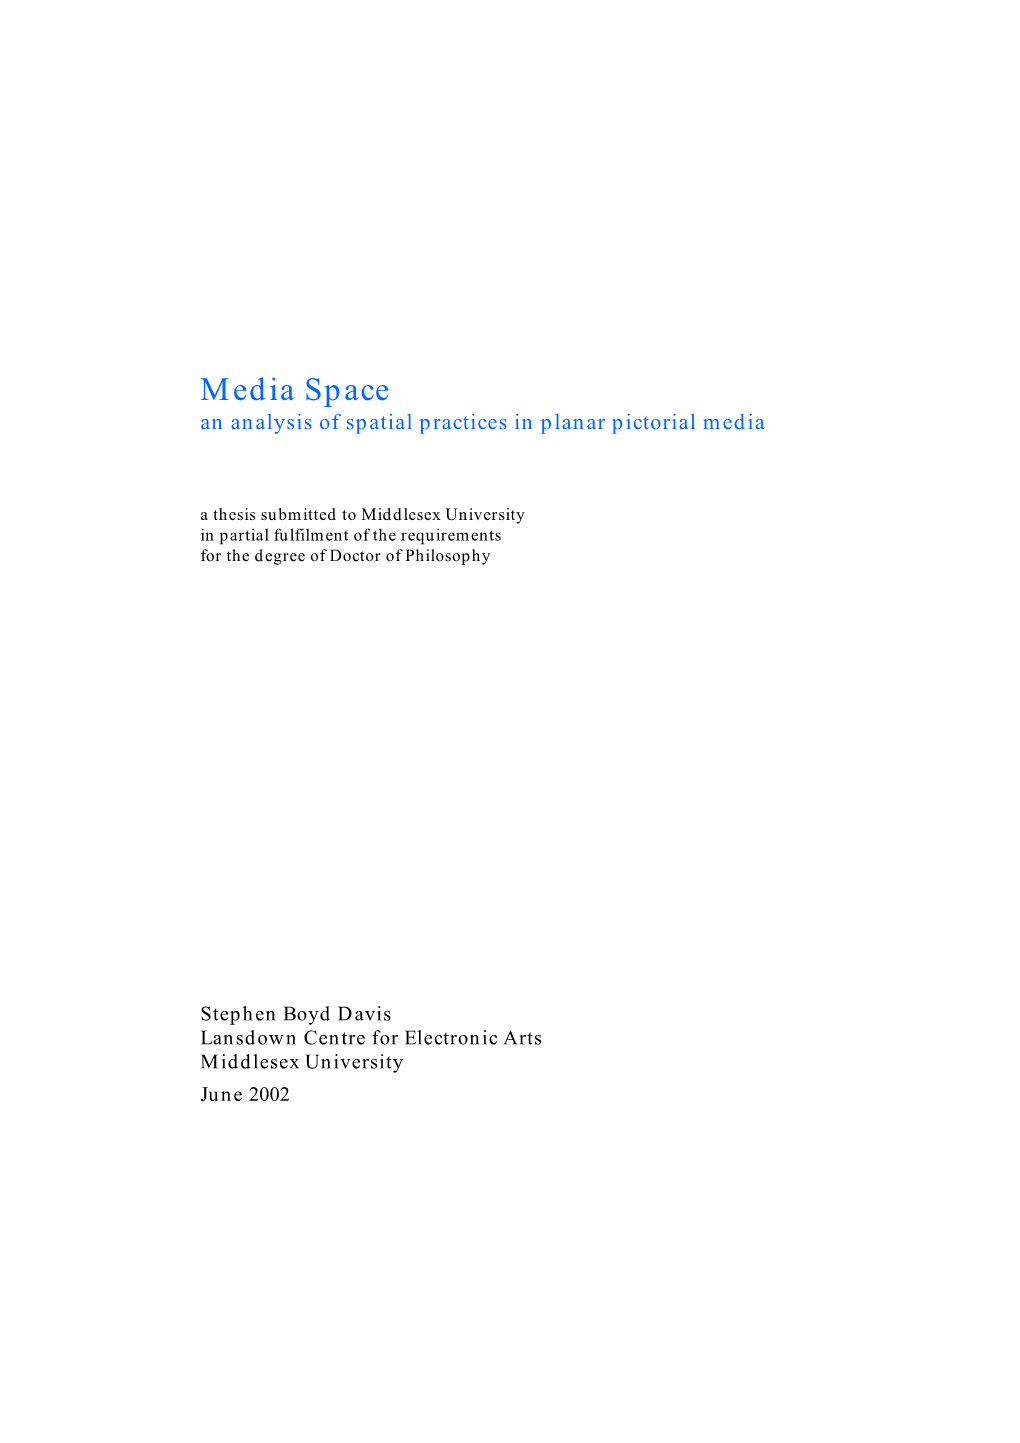 Media Space an Analysis of Spatial Practices in Planar Pictorial Media